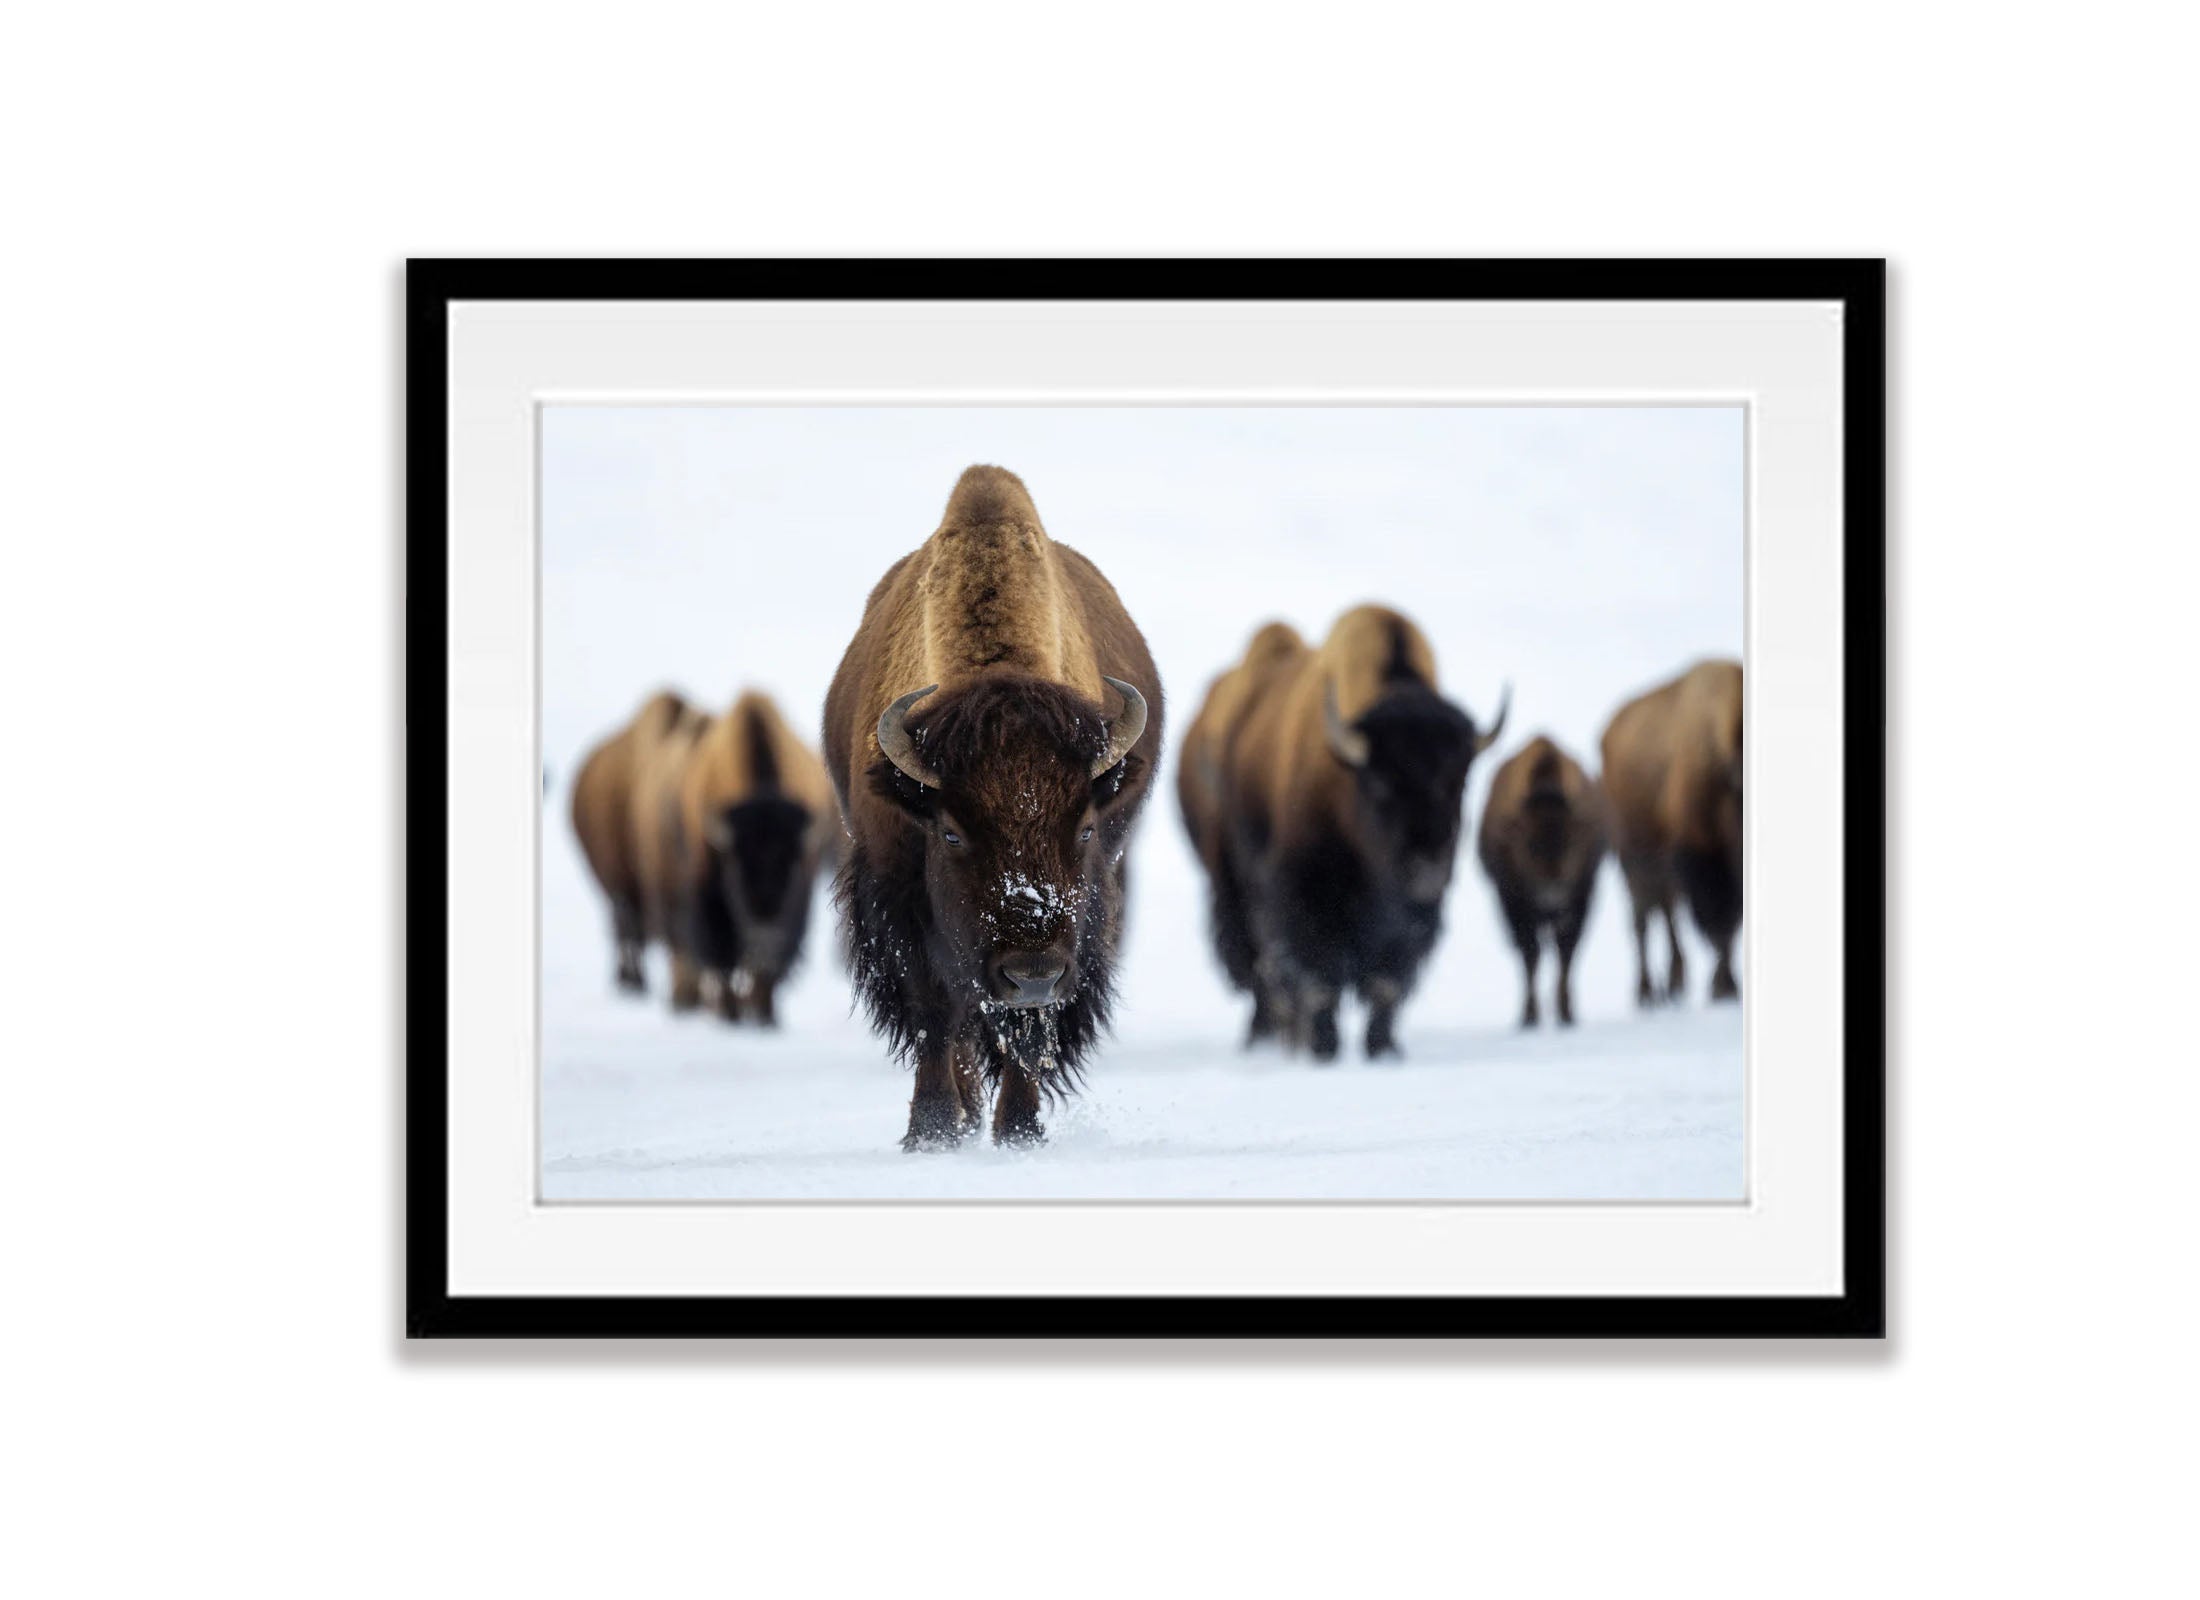 The Bison, Yellowstone NP